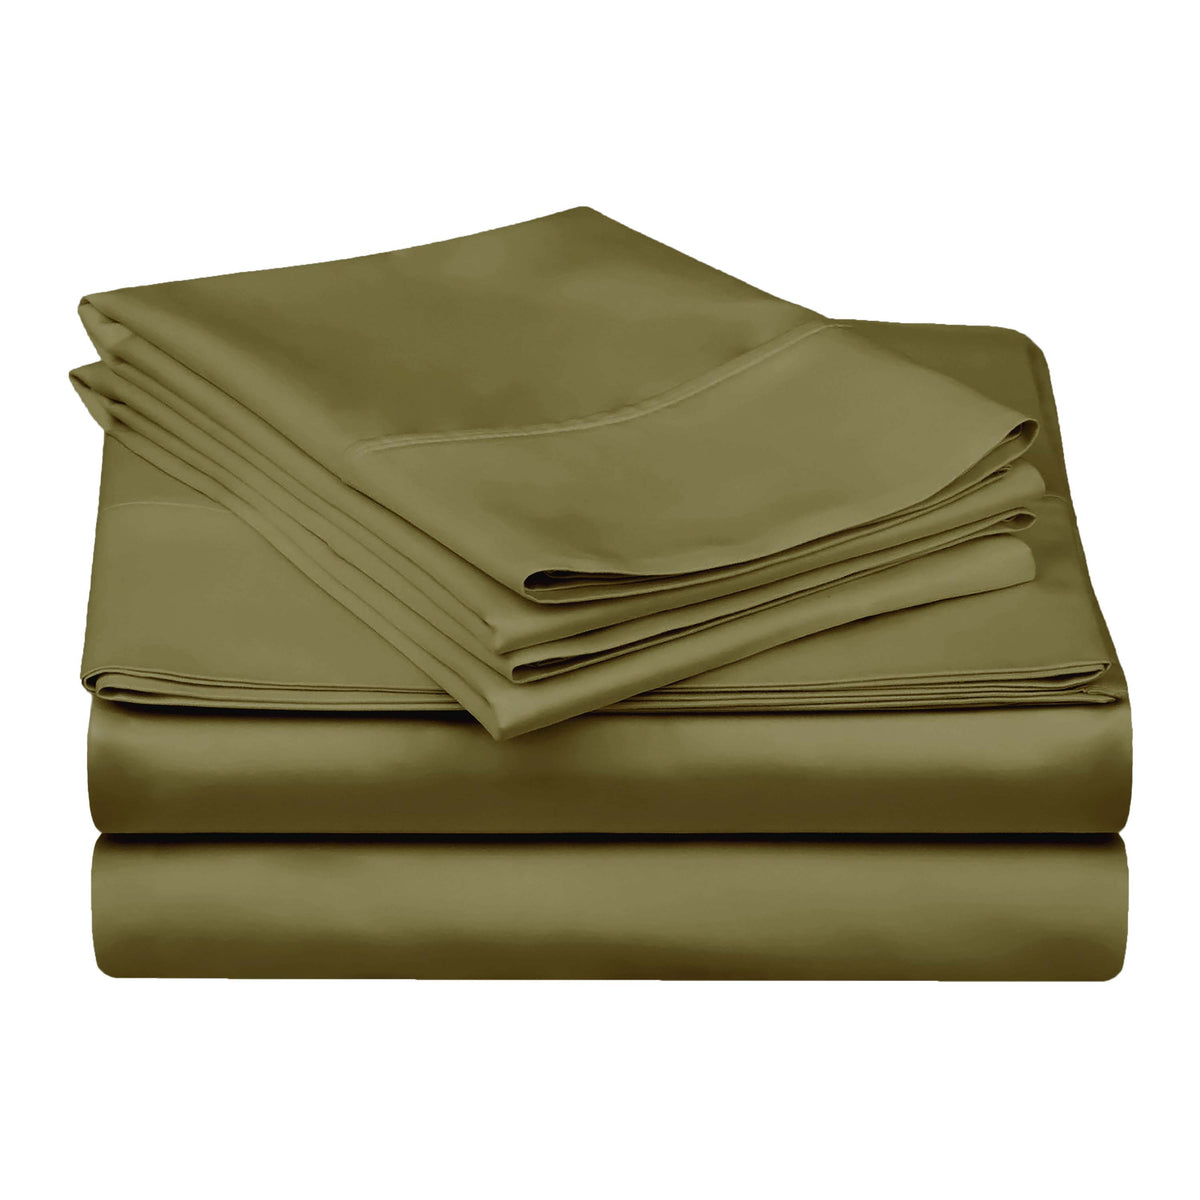 Superior Egyptian Cotton 300 Thread Count Solid Deep Pocket Bed Sheet Set - Sage